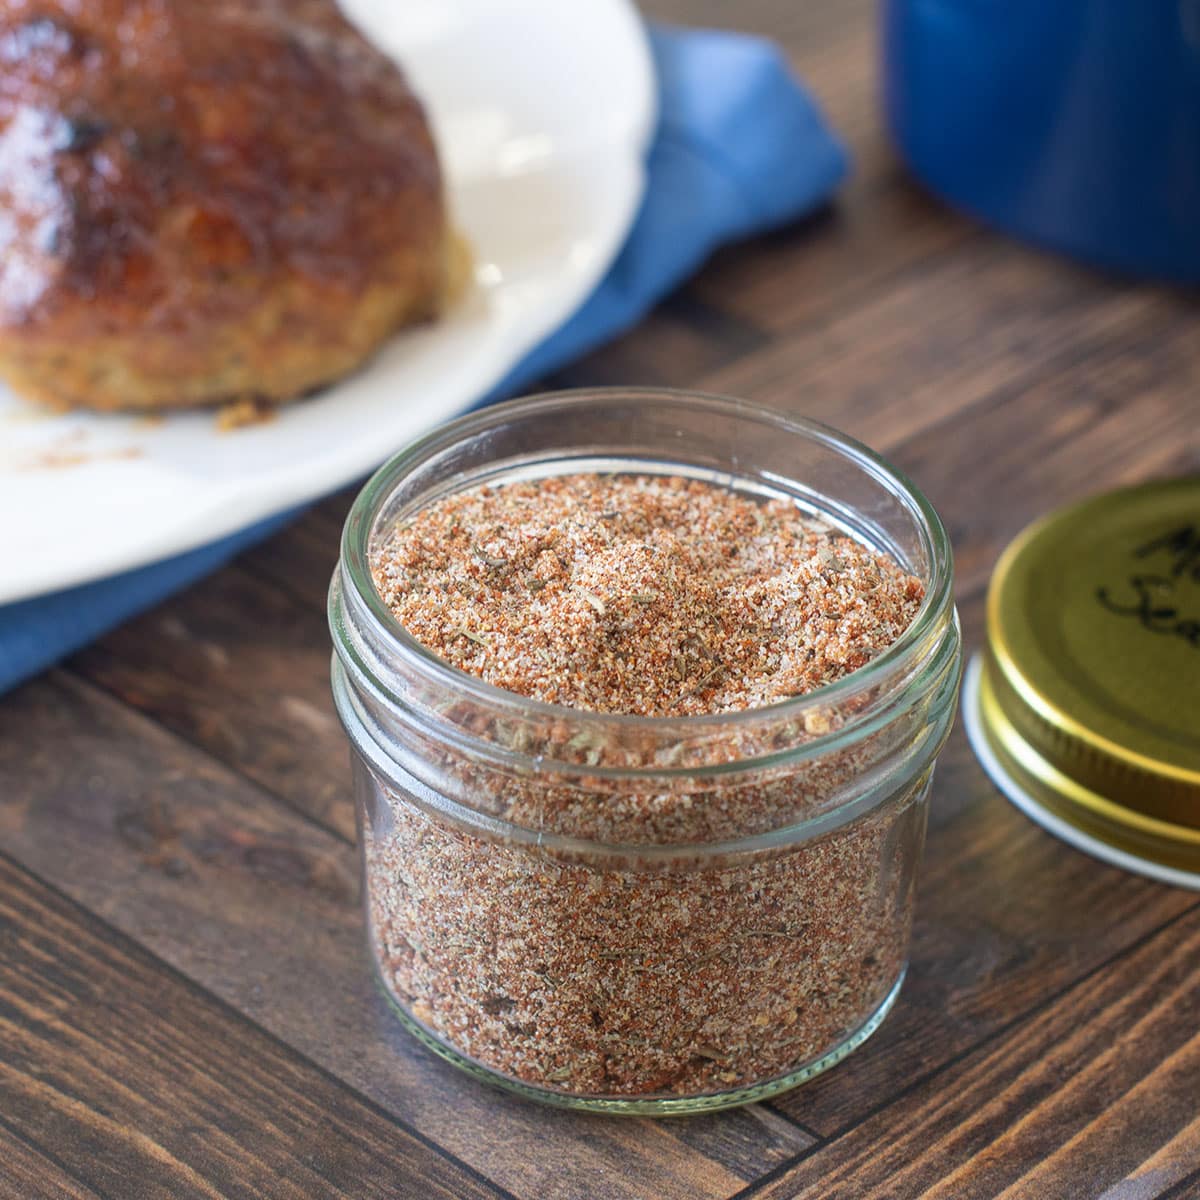 Meatloaf seasoning mix in a glass jar with meatloaf in background.